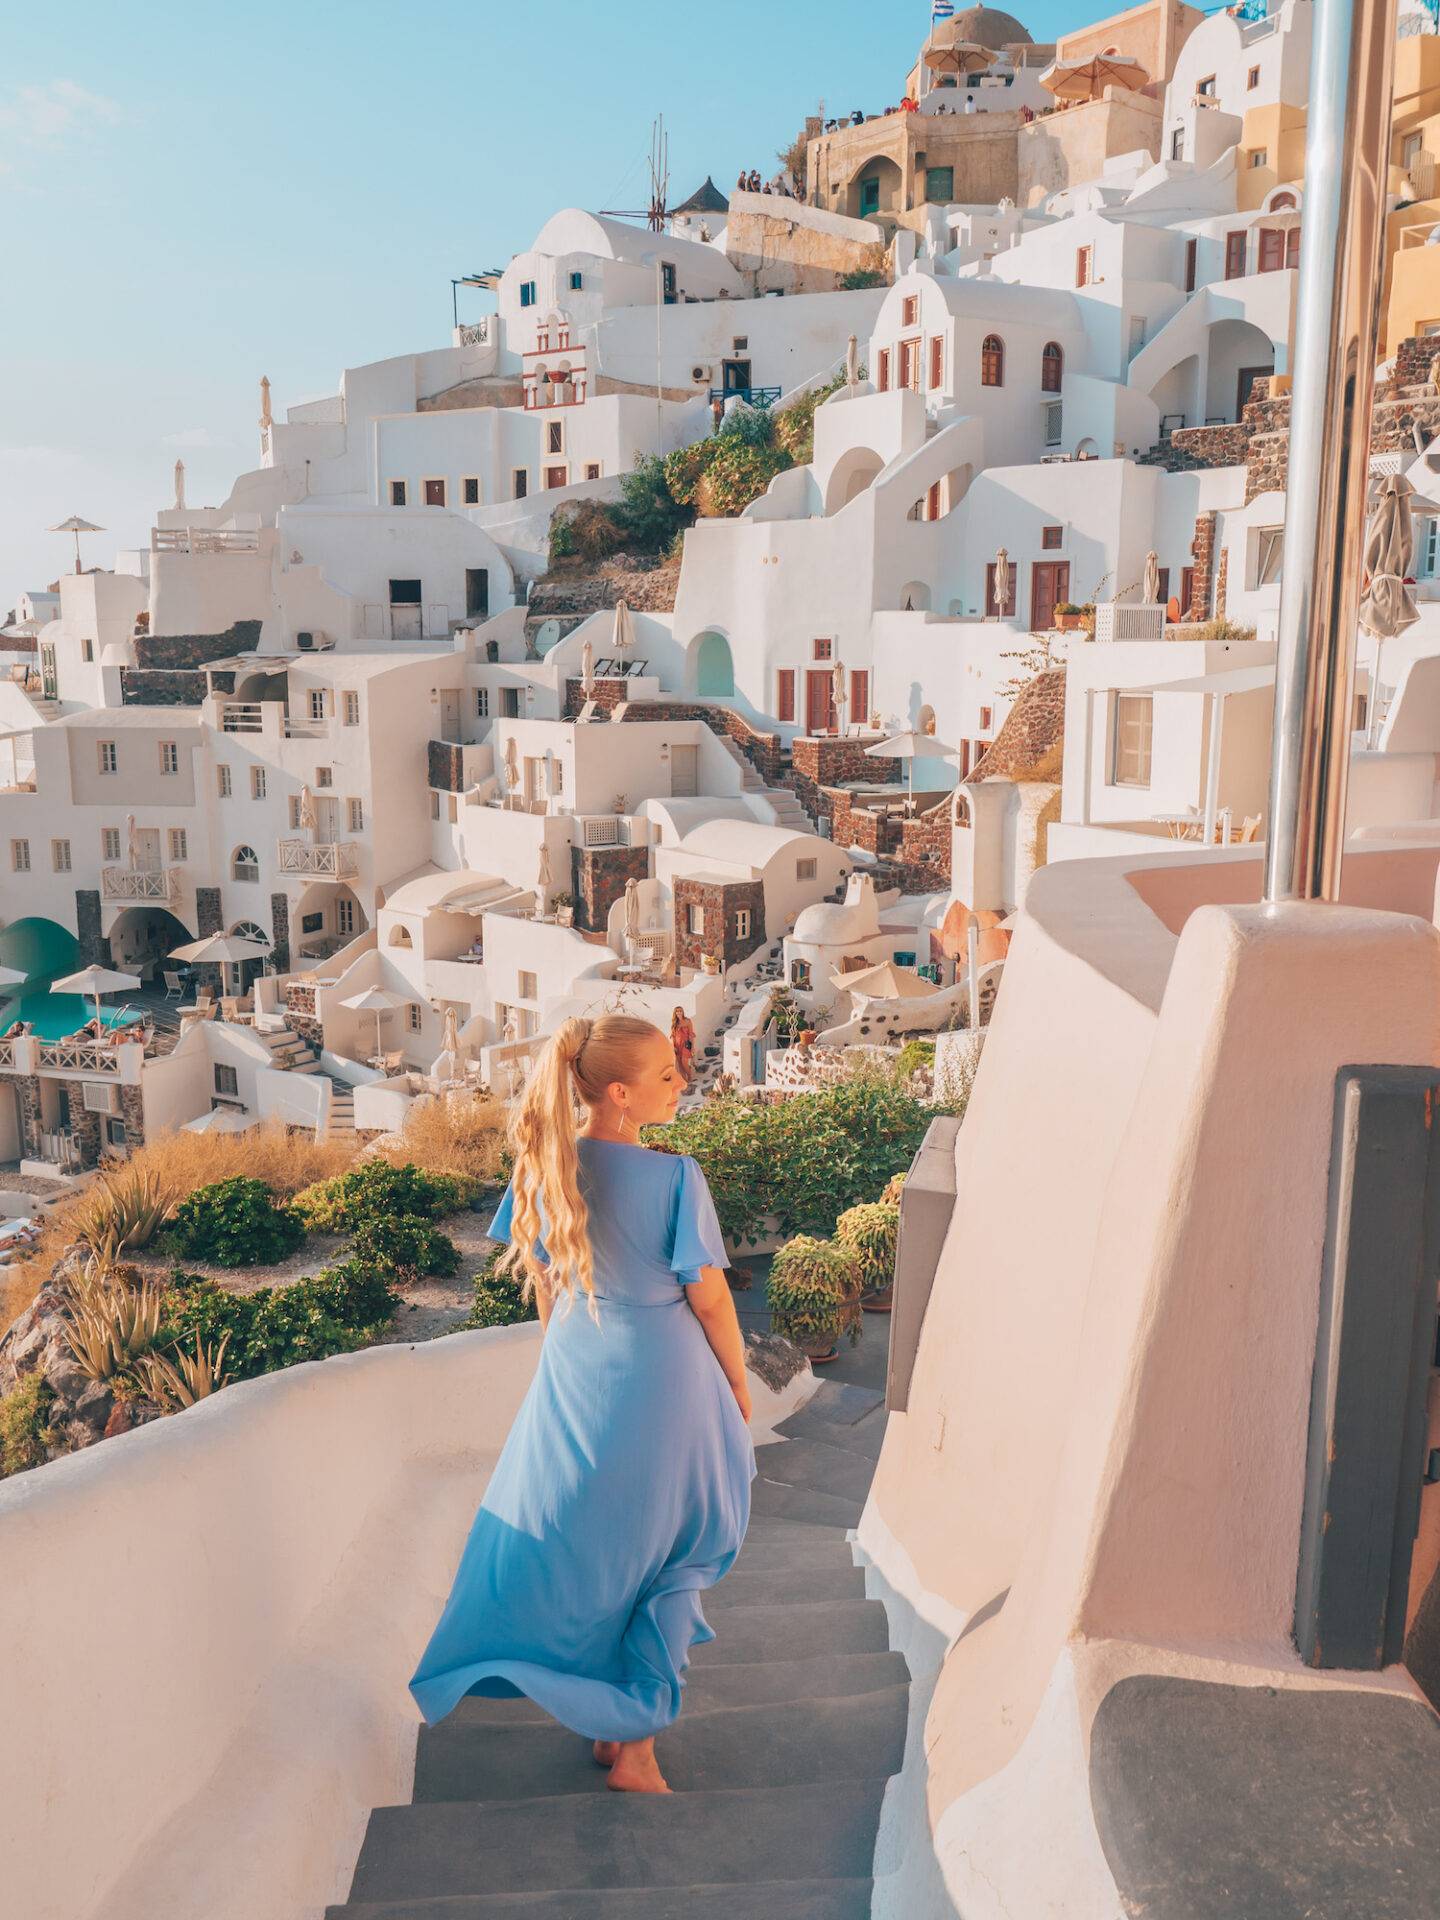 Dying to visit Santorini but think it's the kind of trip that's lavishly expensive? Visiting Santorini on a budget is completely possible and I'm here to tell you how! From flight and hotel bookings to dining and activity recommendations, read this guide to find out exactly how you can visit Santorini on a budget. Pictured here: Take day trips to Oia rather than staying there